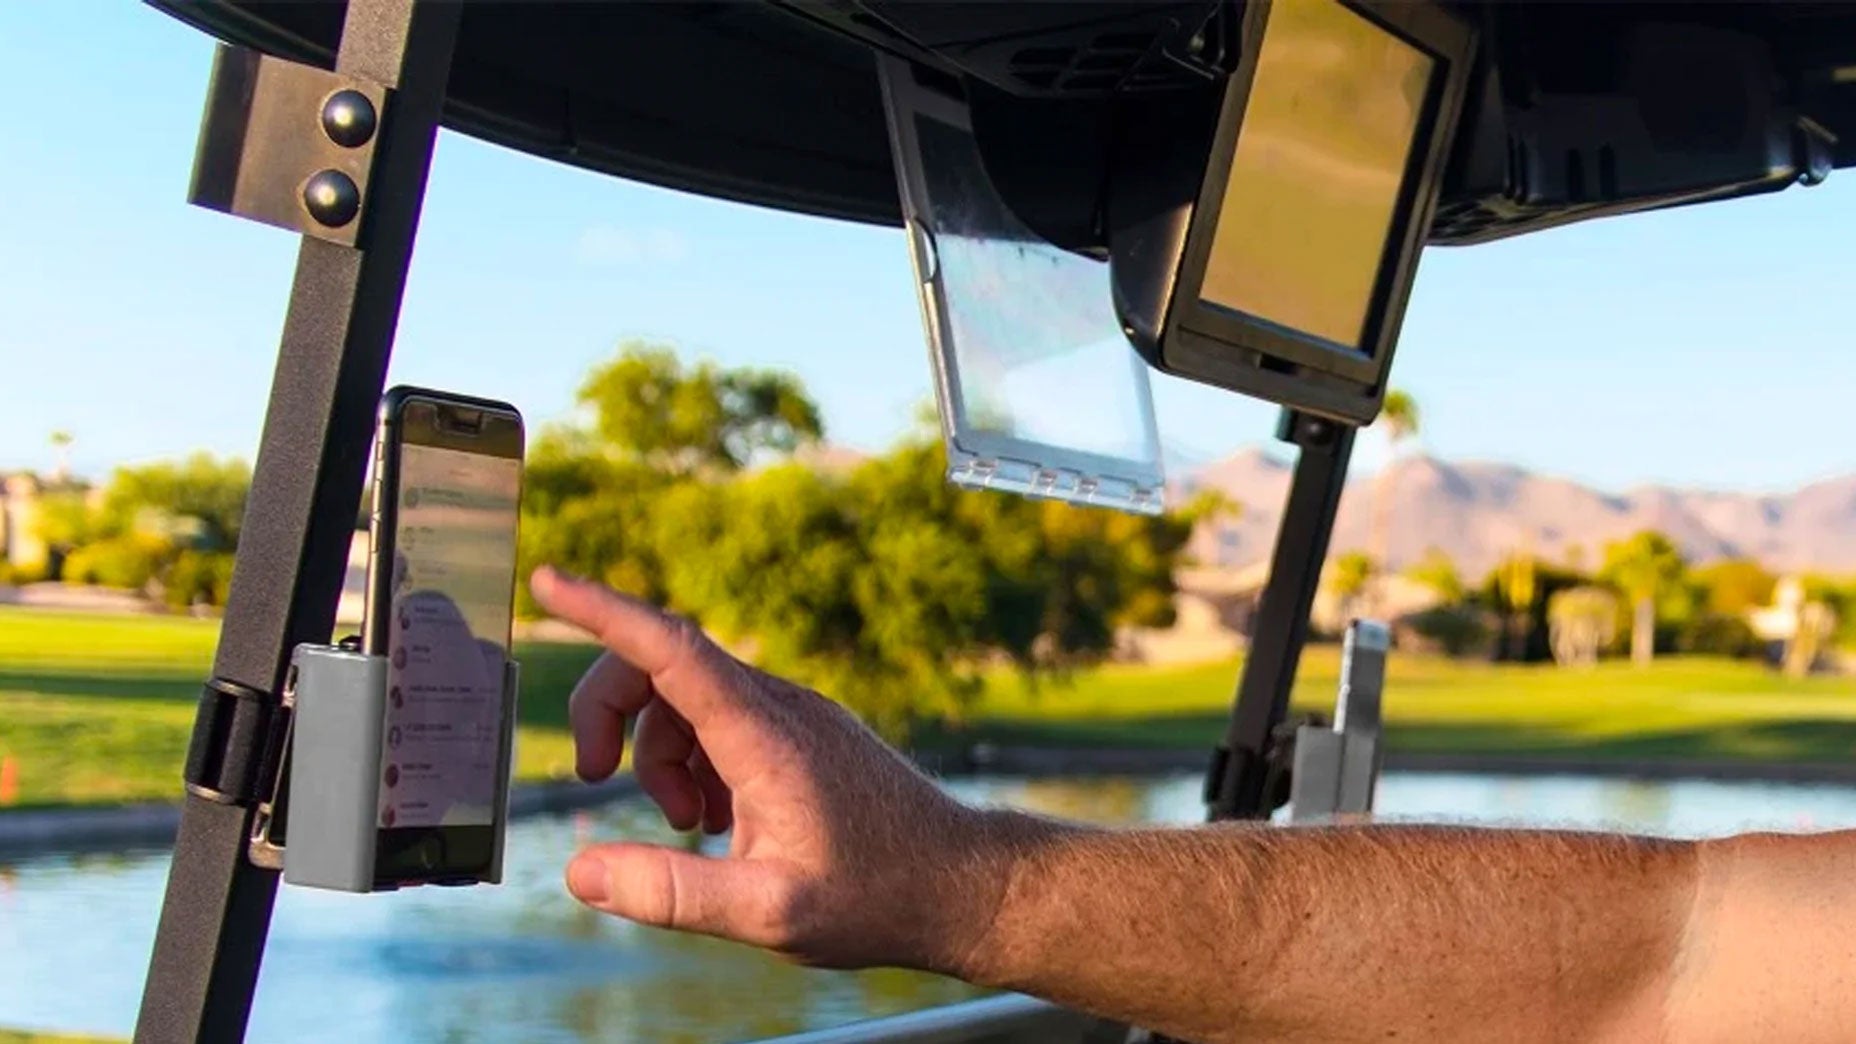 This ‘why didn’t I think of that?’ gadget is a must-have for spring golf